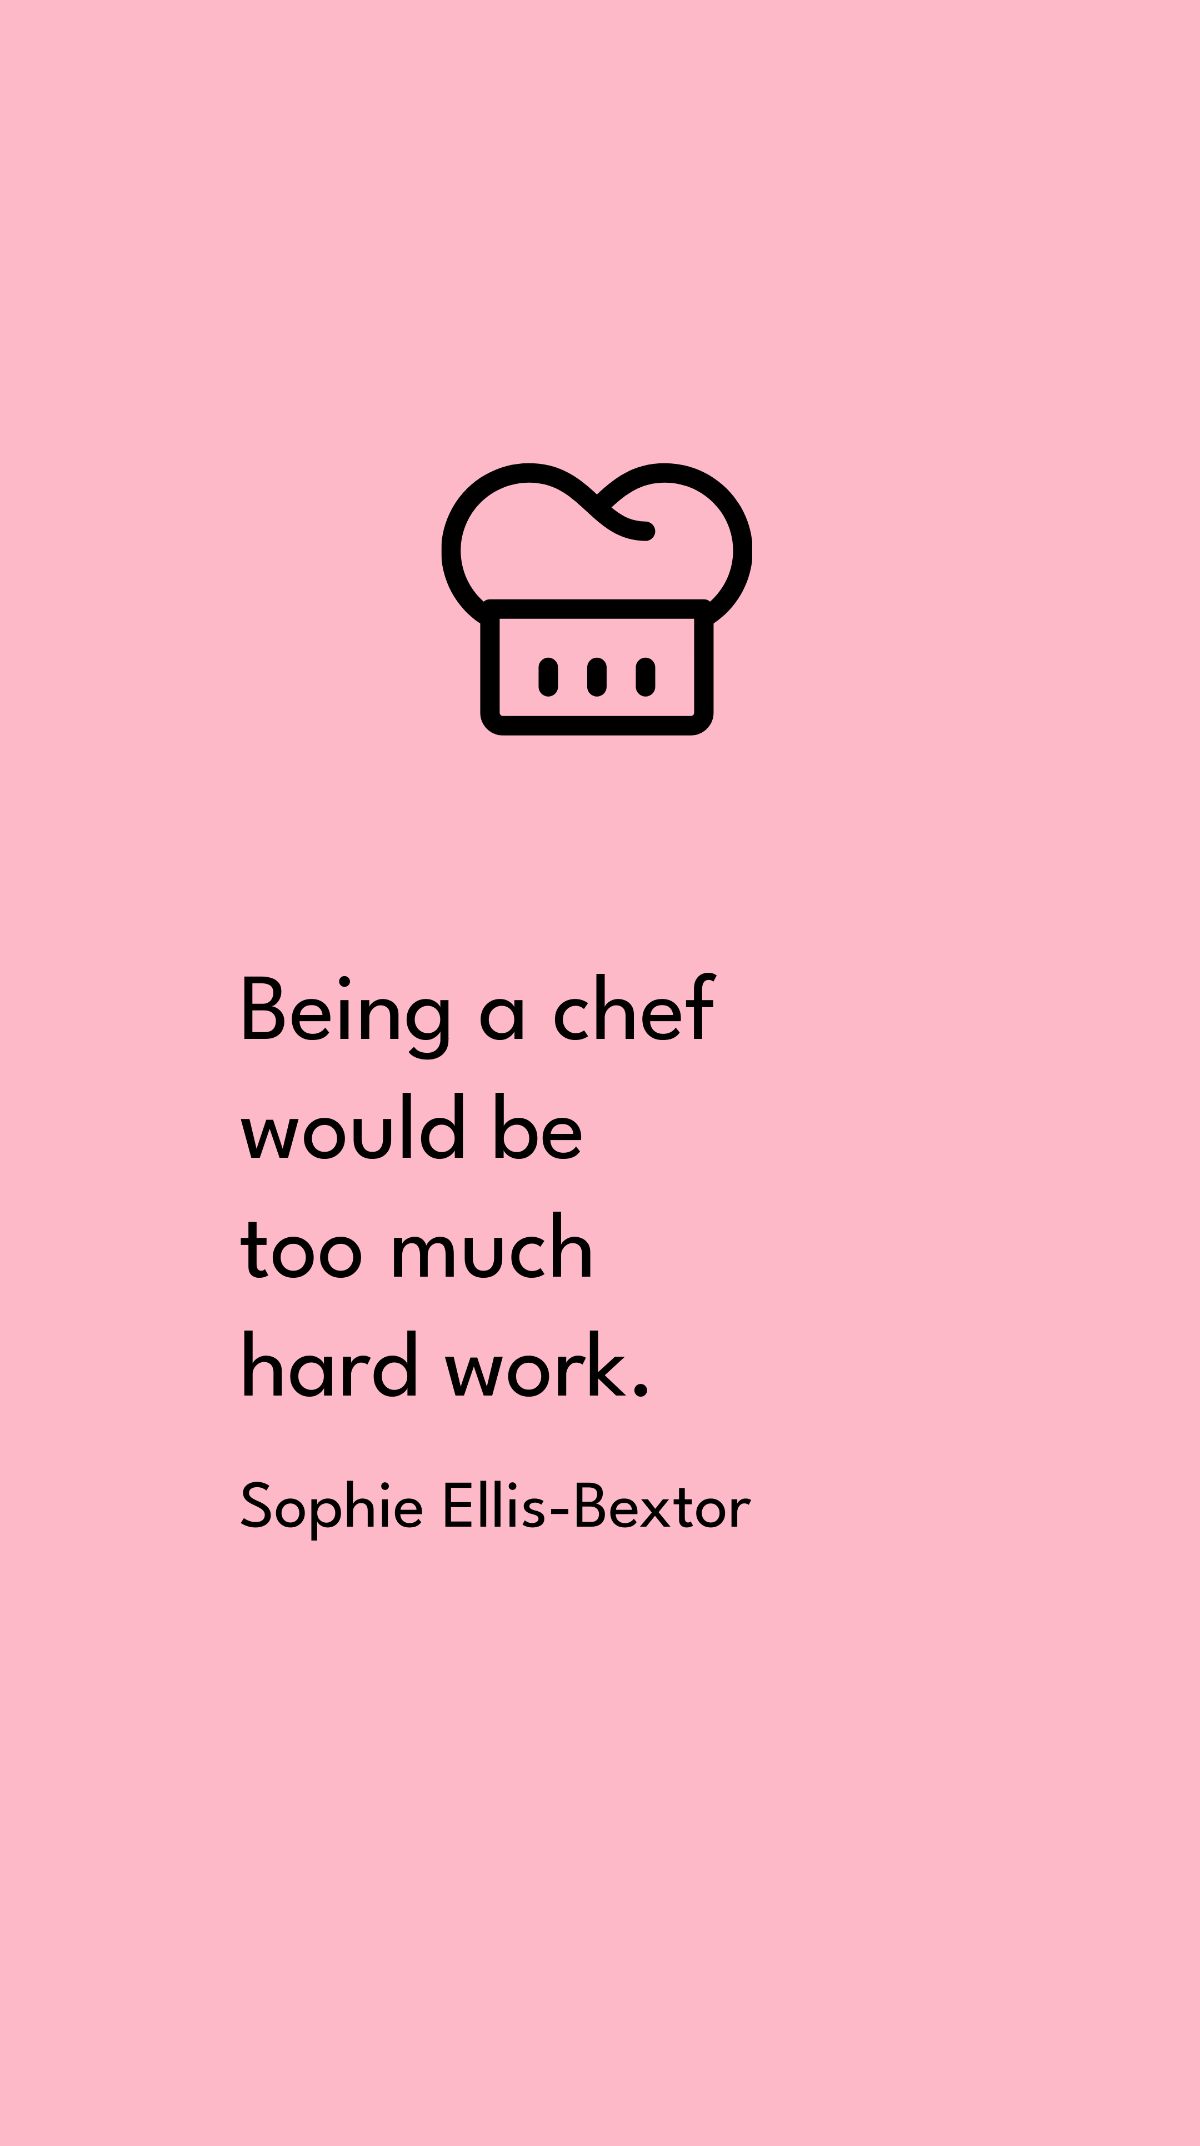 Free Sophie Ellis-Bextor - Being a chef would be too much hard work. Template